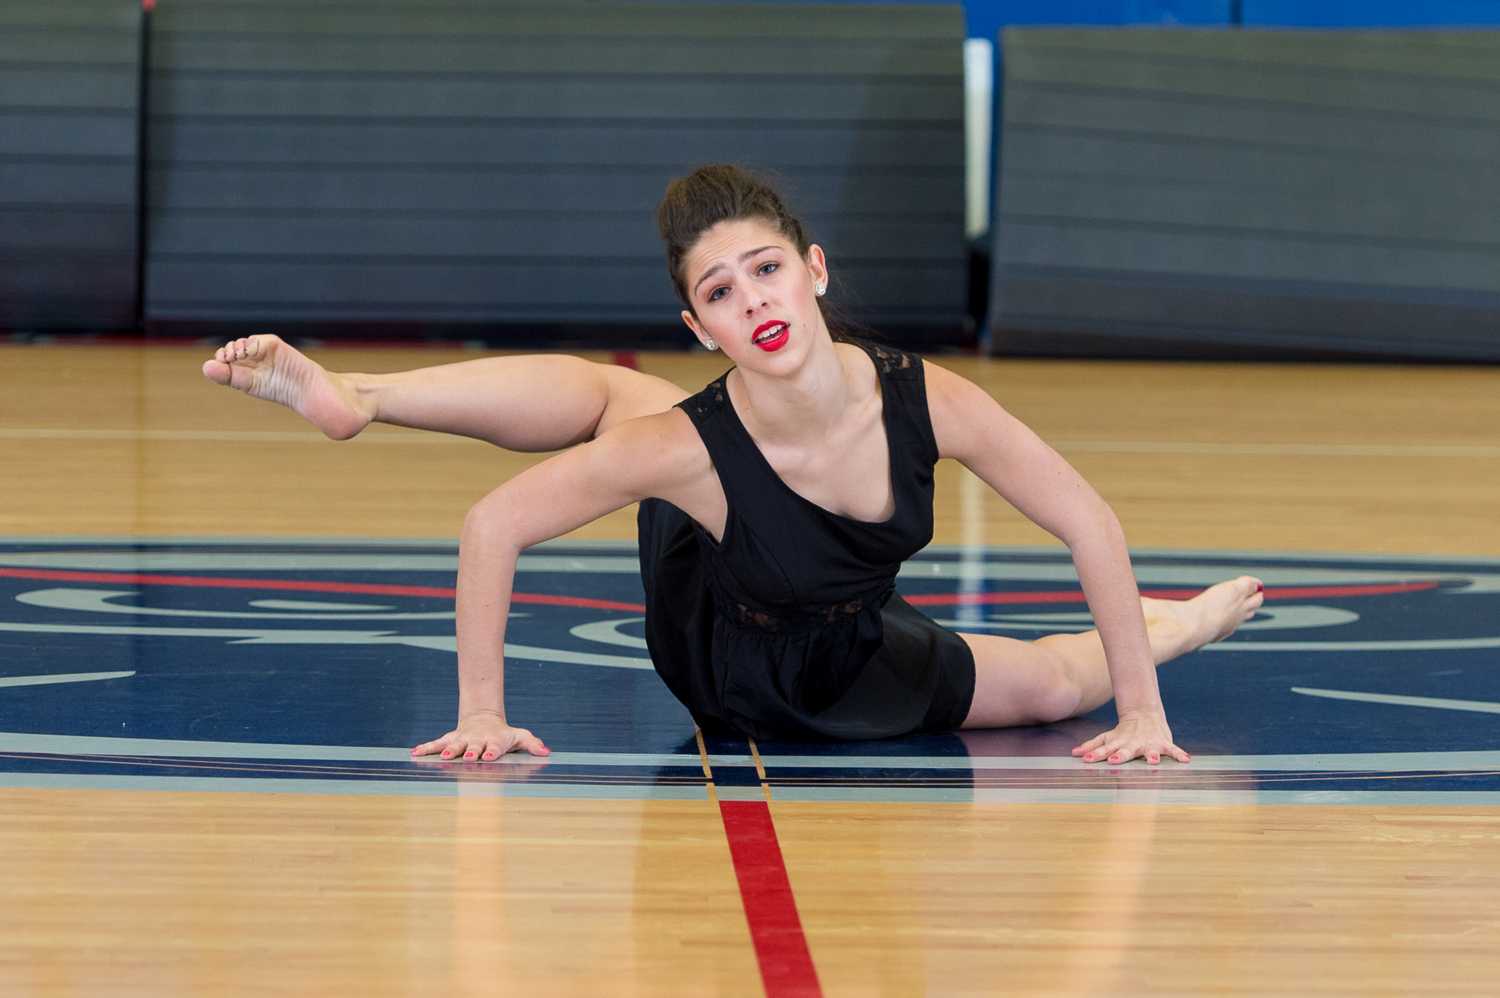 Danielle Piazza of the FAU Dance Team performs at the 2015 FAU Dance Team Showcase on Friday evening, Jan 9. 